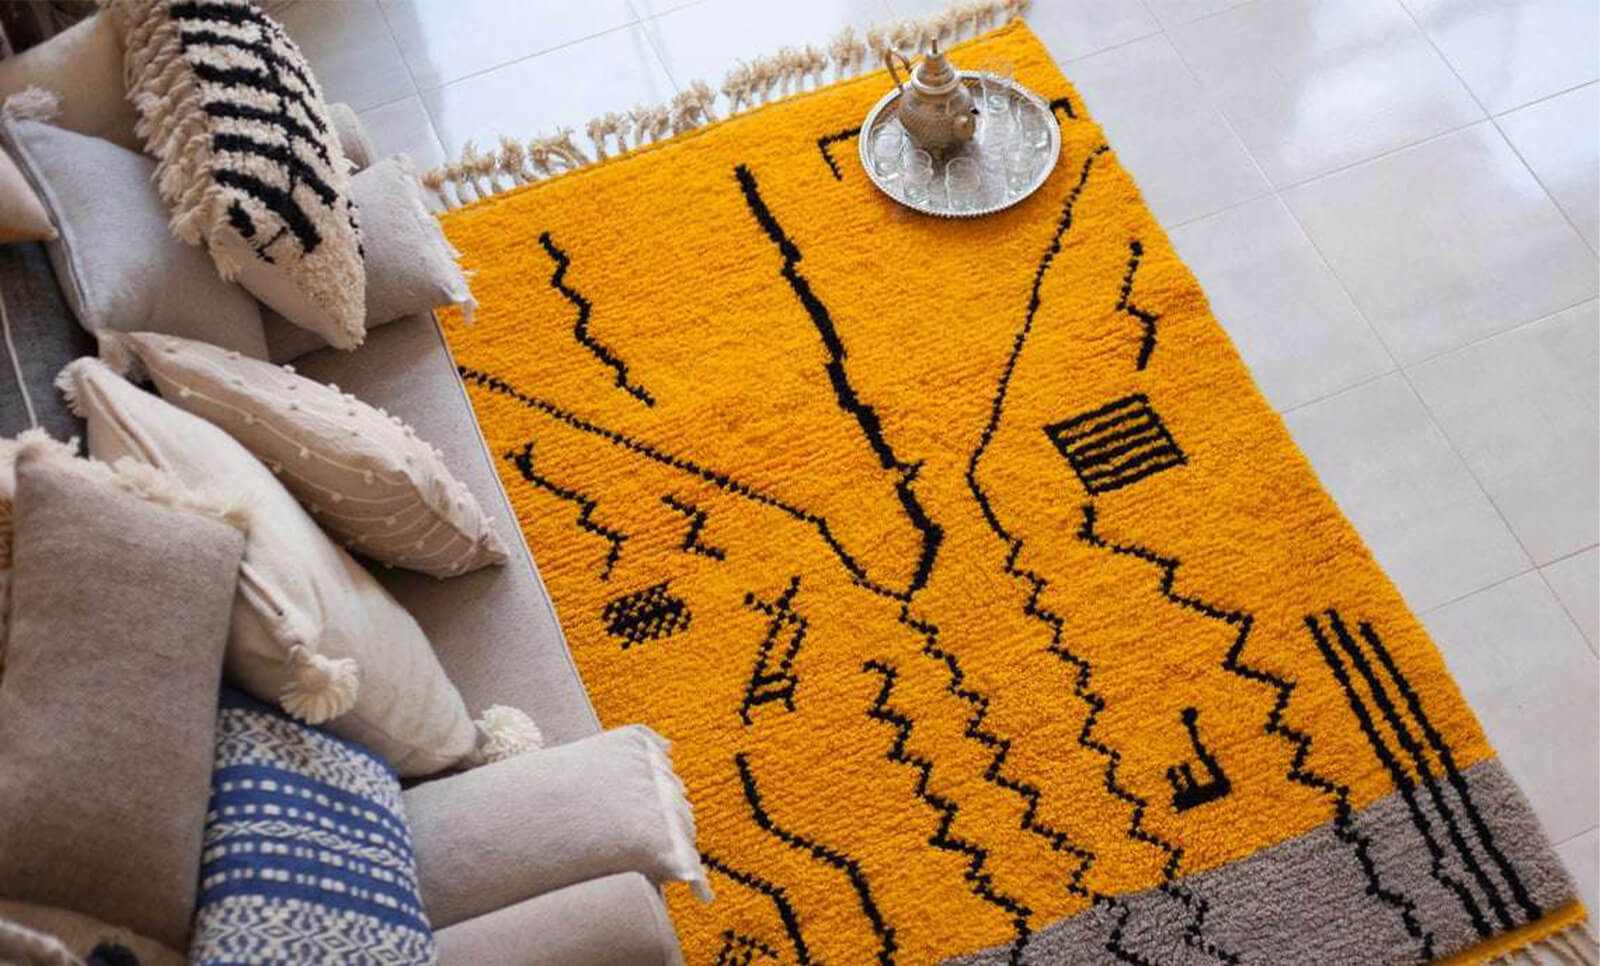 Berber women crafted rugs for their own homes